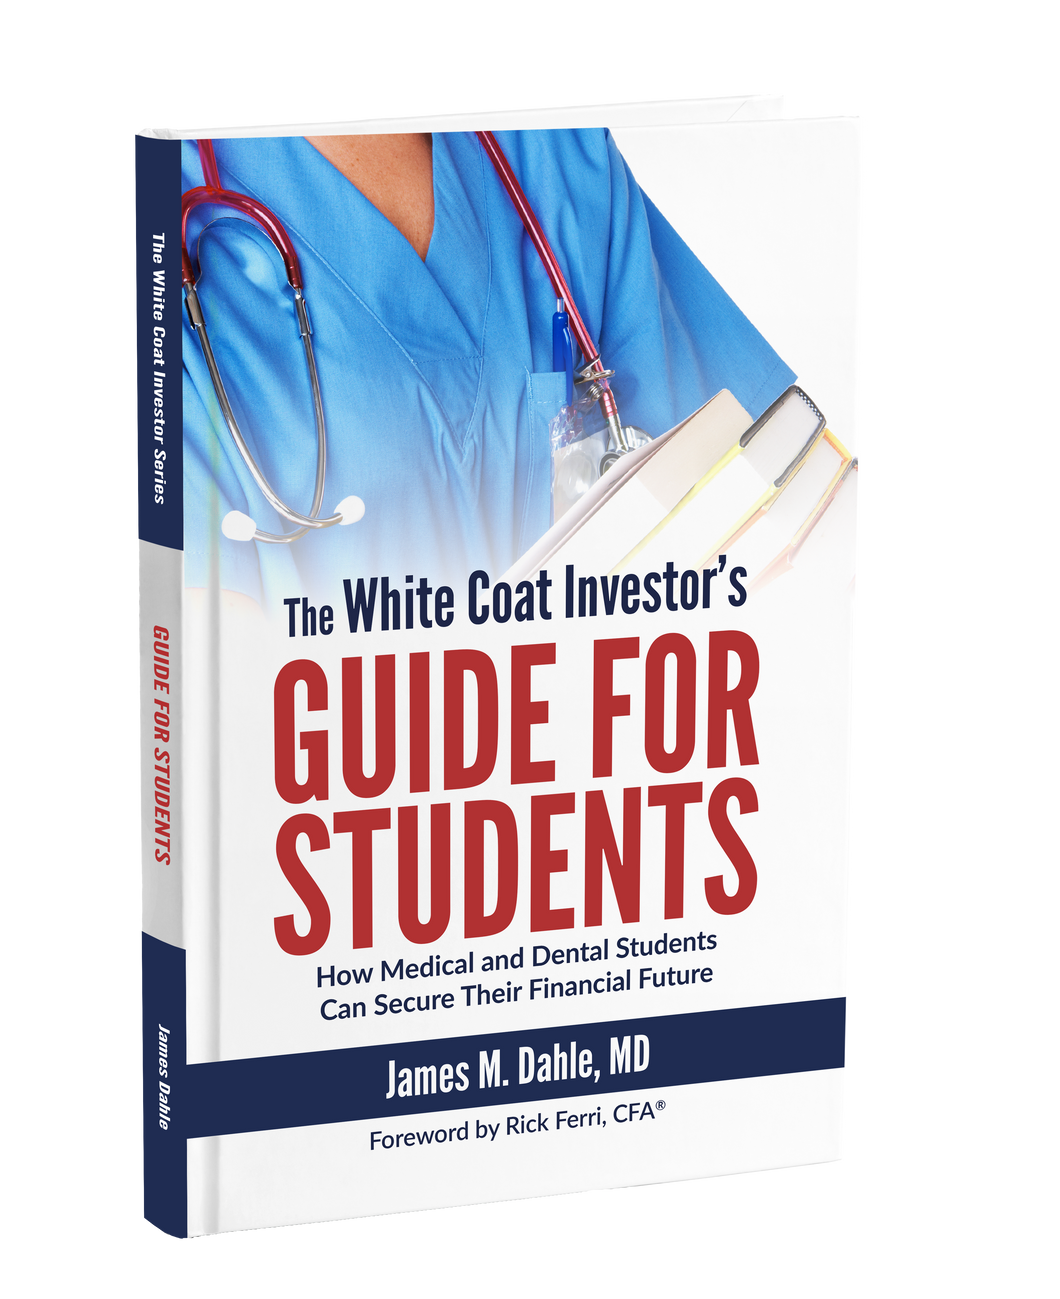 Book: Guide for Students